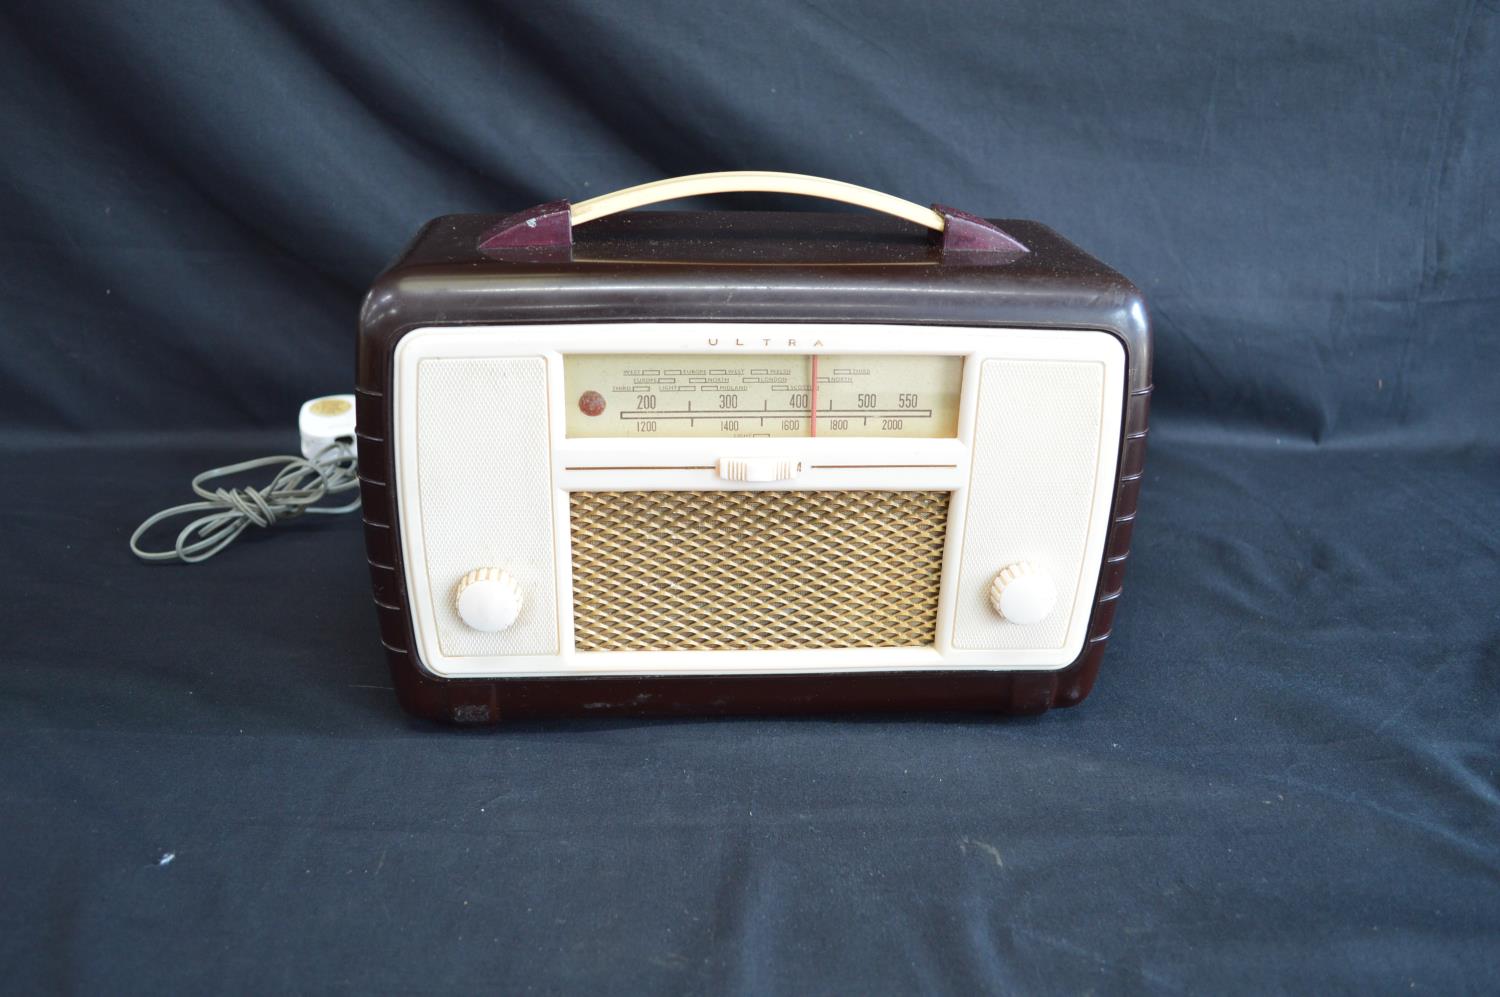 Ultra Bakelite radio with top carrying handle - 30.5cm wide together with a reproduction - Image 4 of 5